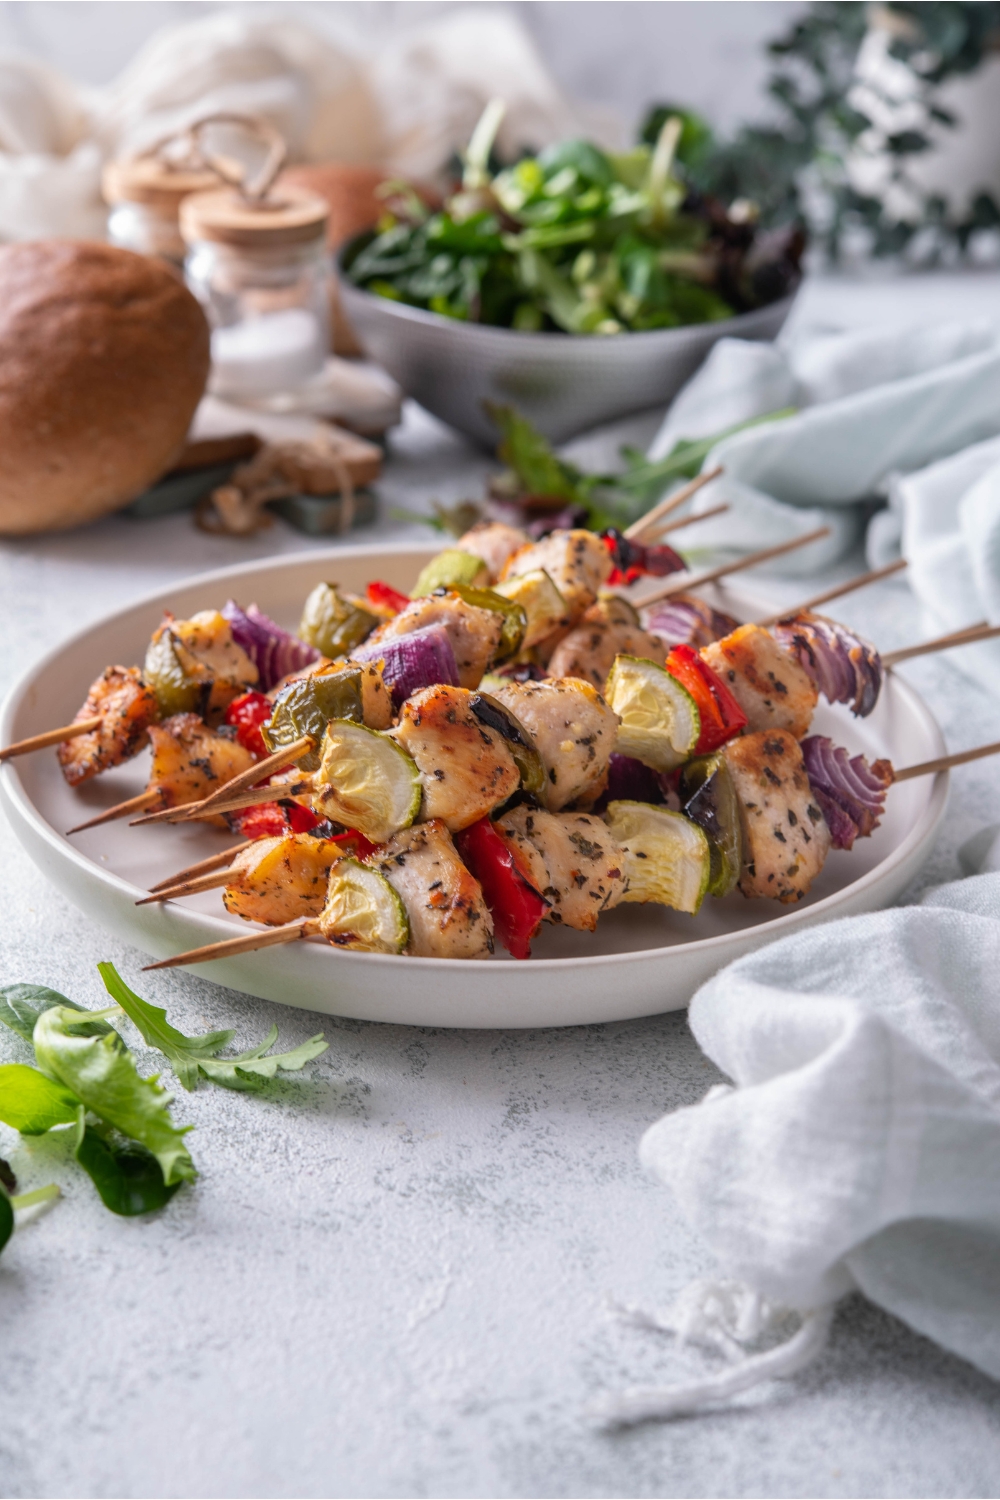 A plate of six chicken and vegetable skewers with red onion, bell pepper, and zucchini in the skewers.